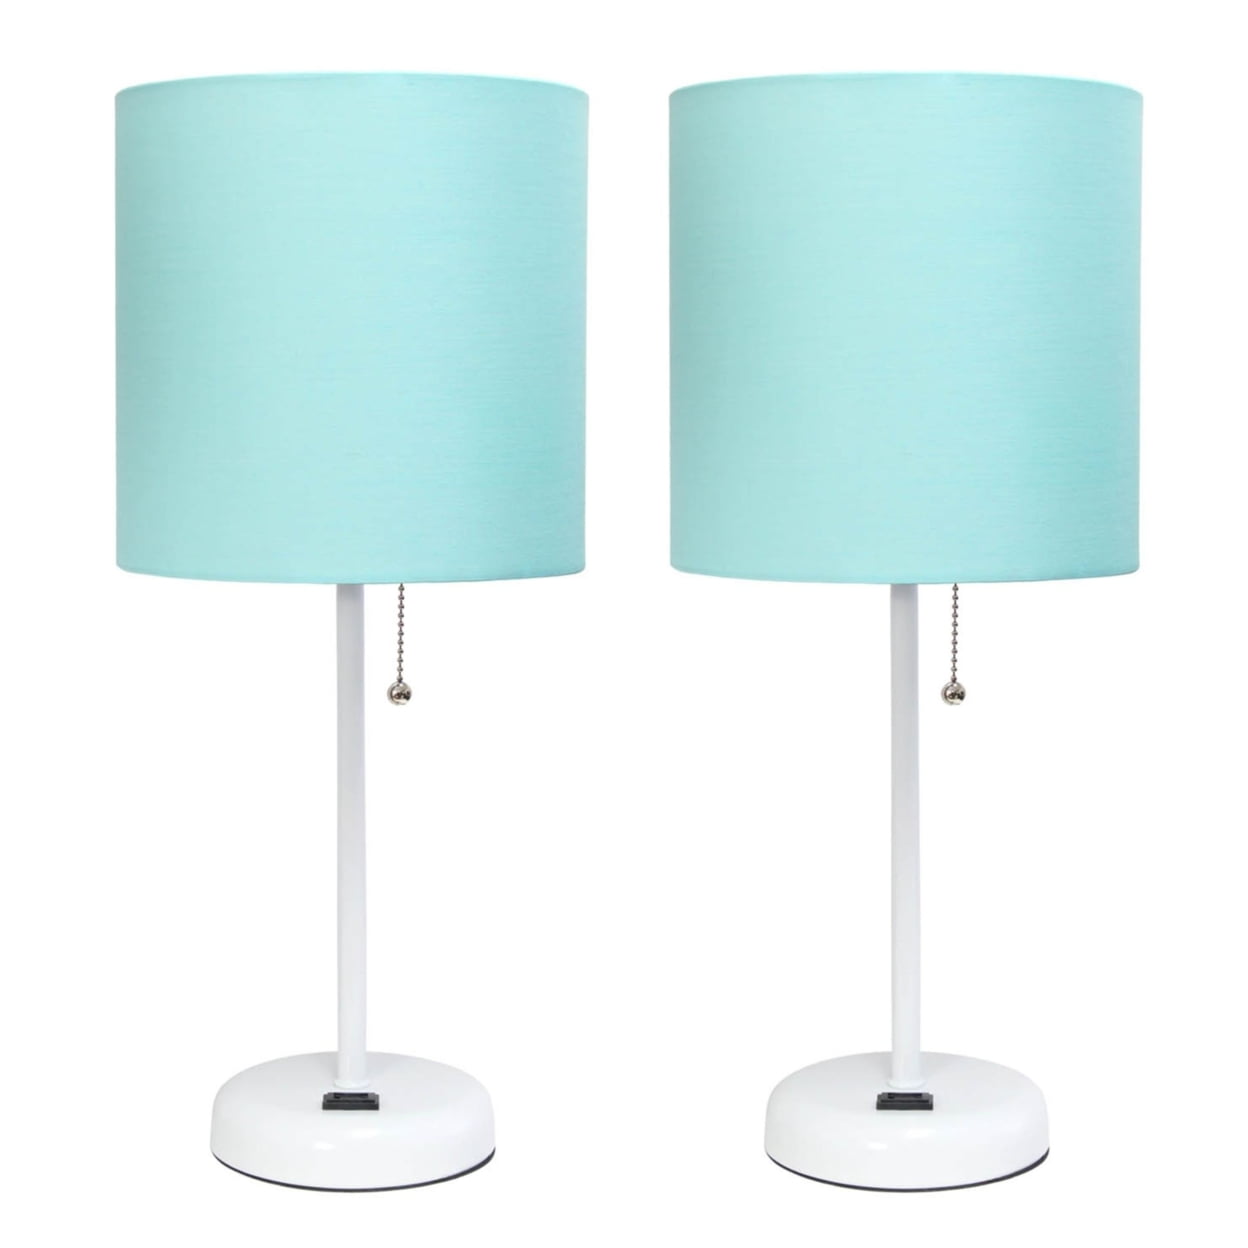 Lc2001-aow-2pk White Stick Table Lamp With Charging Outlet & Fabric Shade, Aqua - Set Of 2